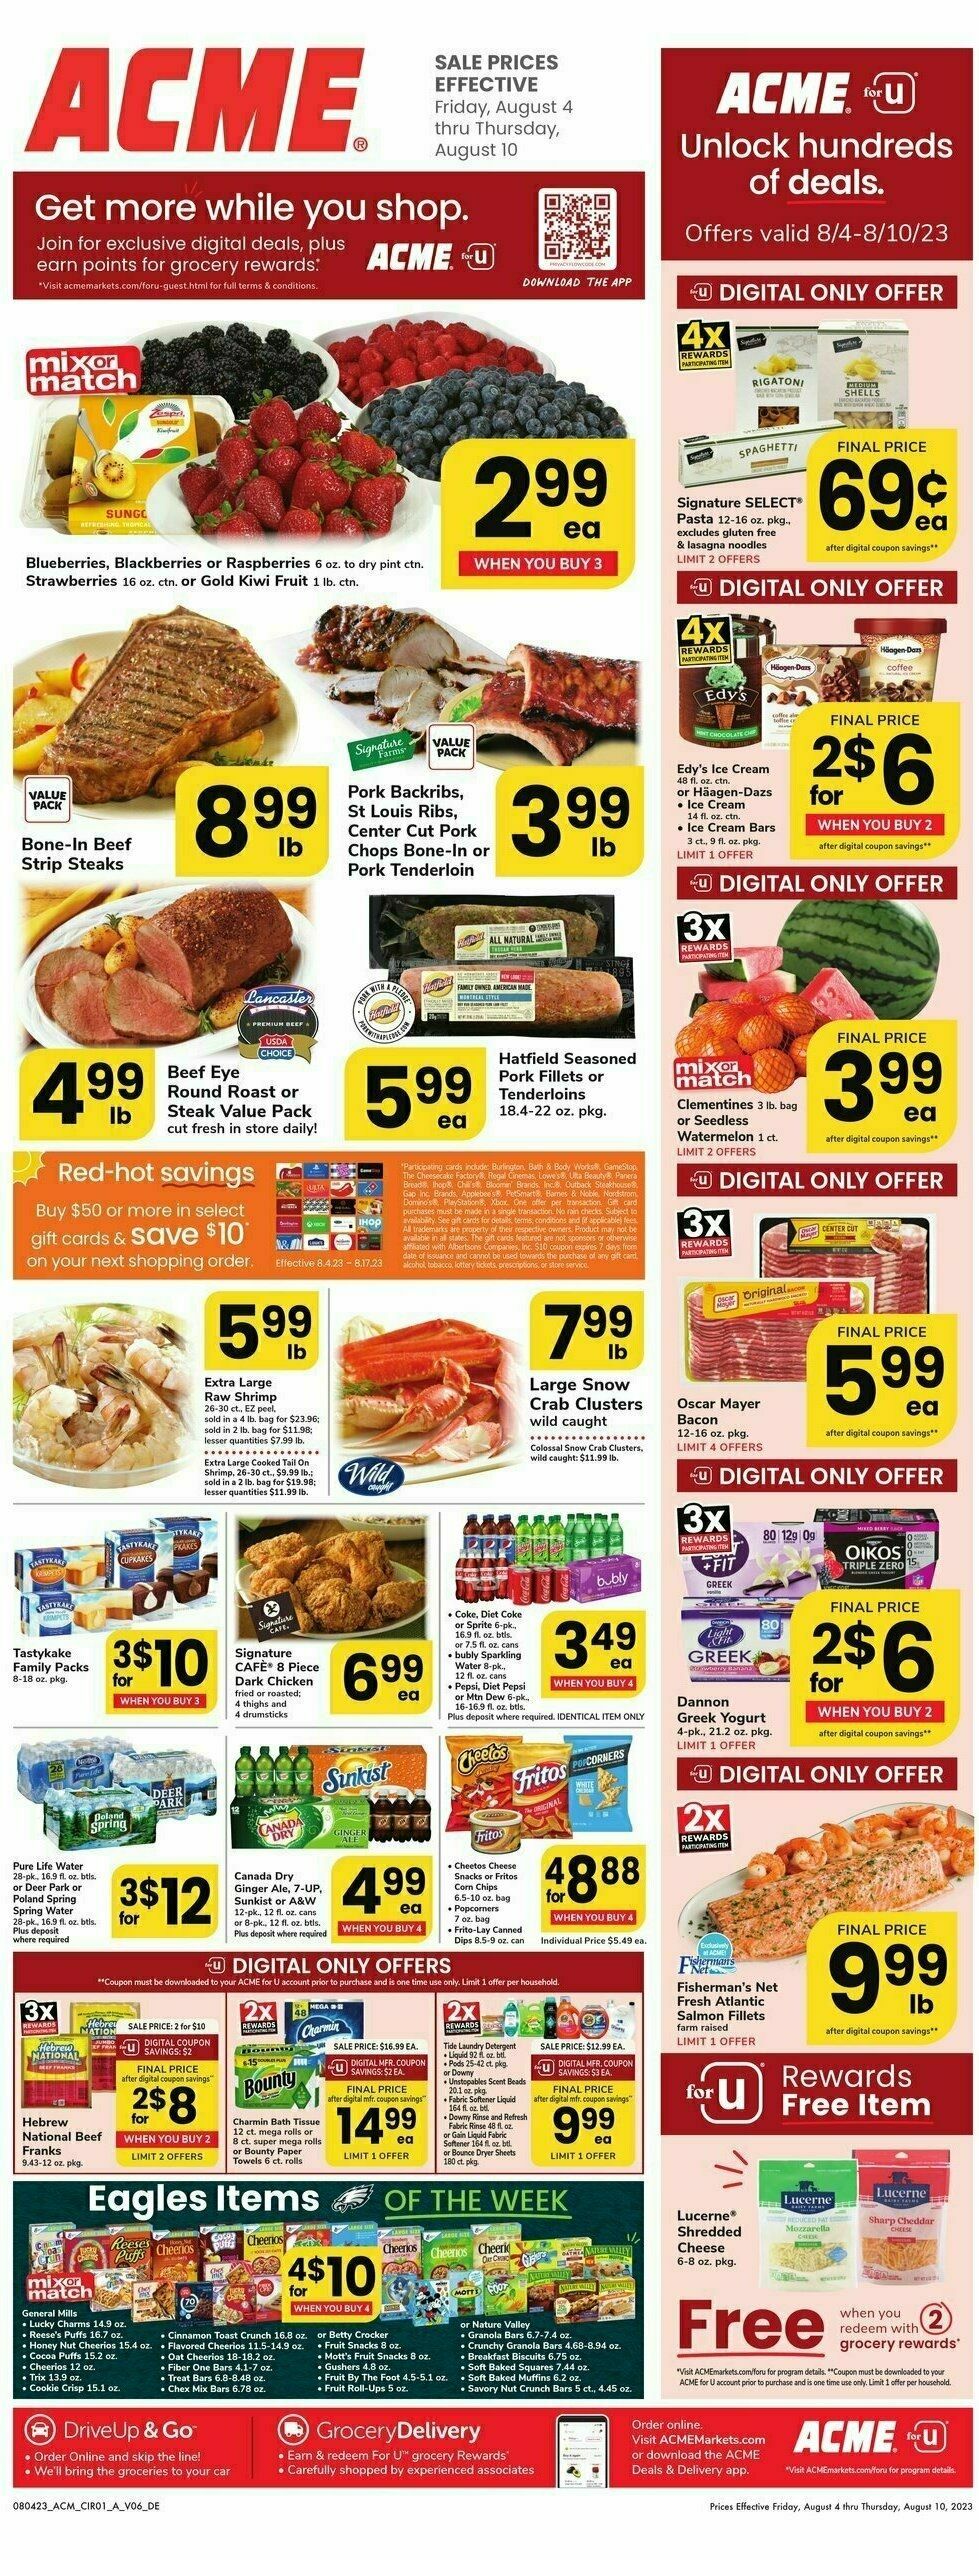 ACME Markets Weekly Ad from August 4